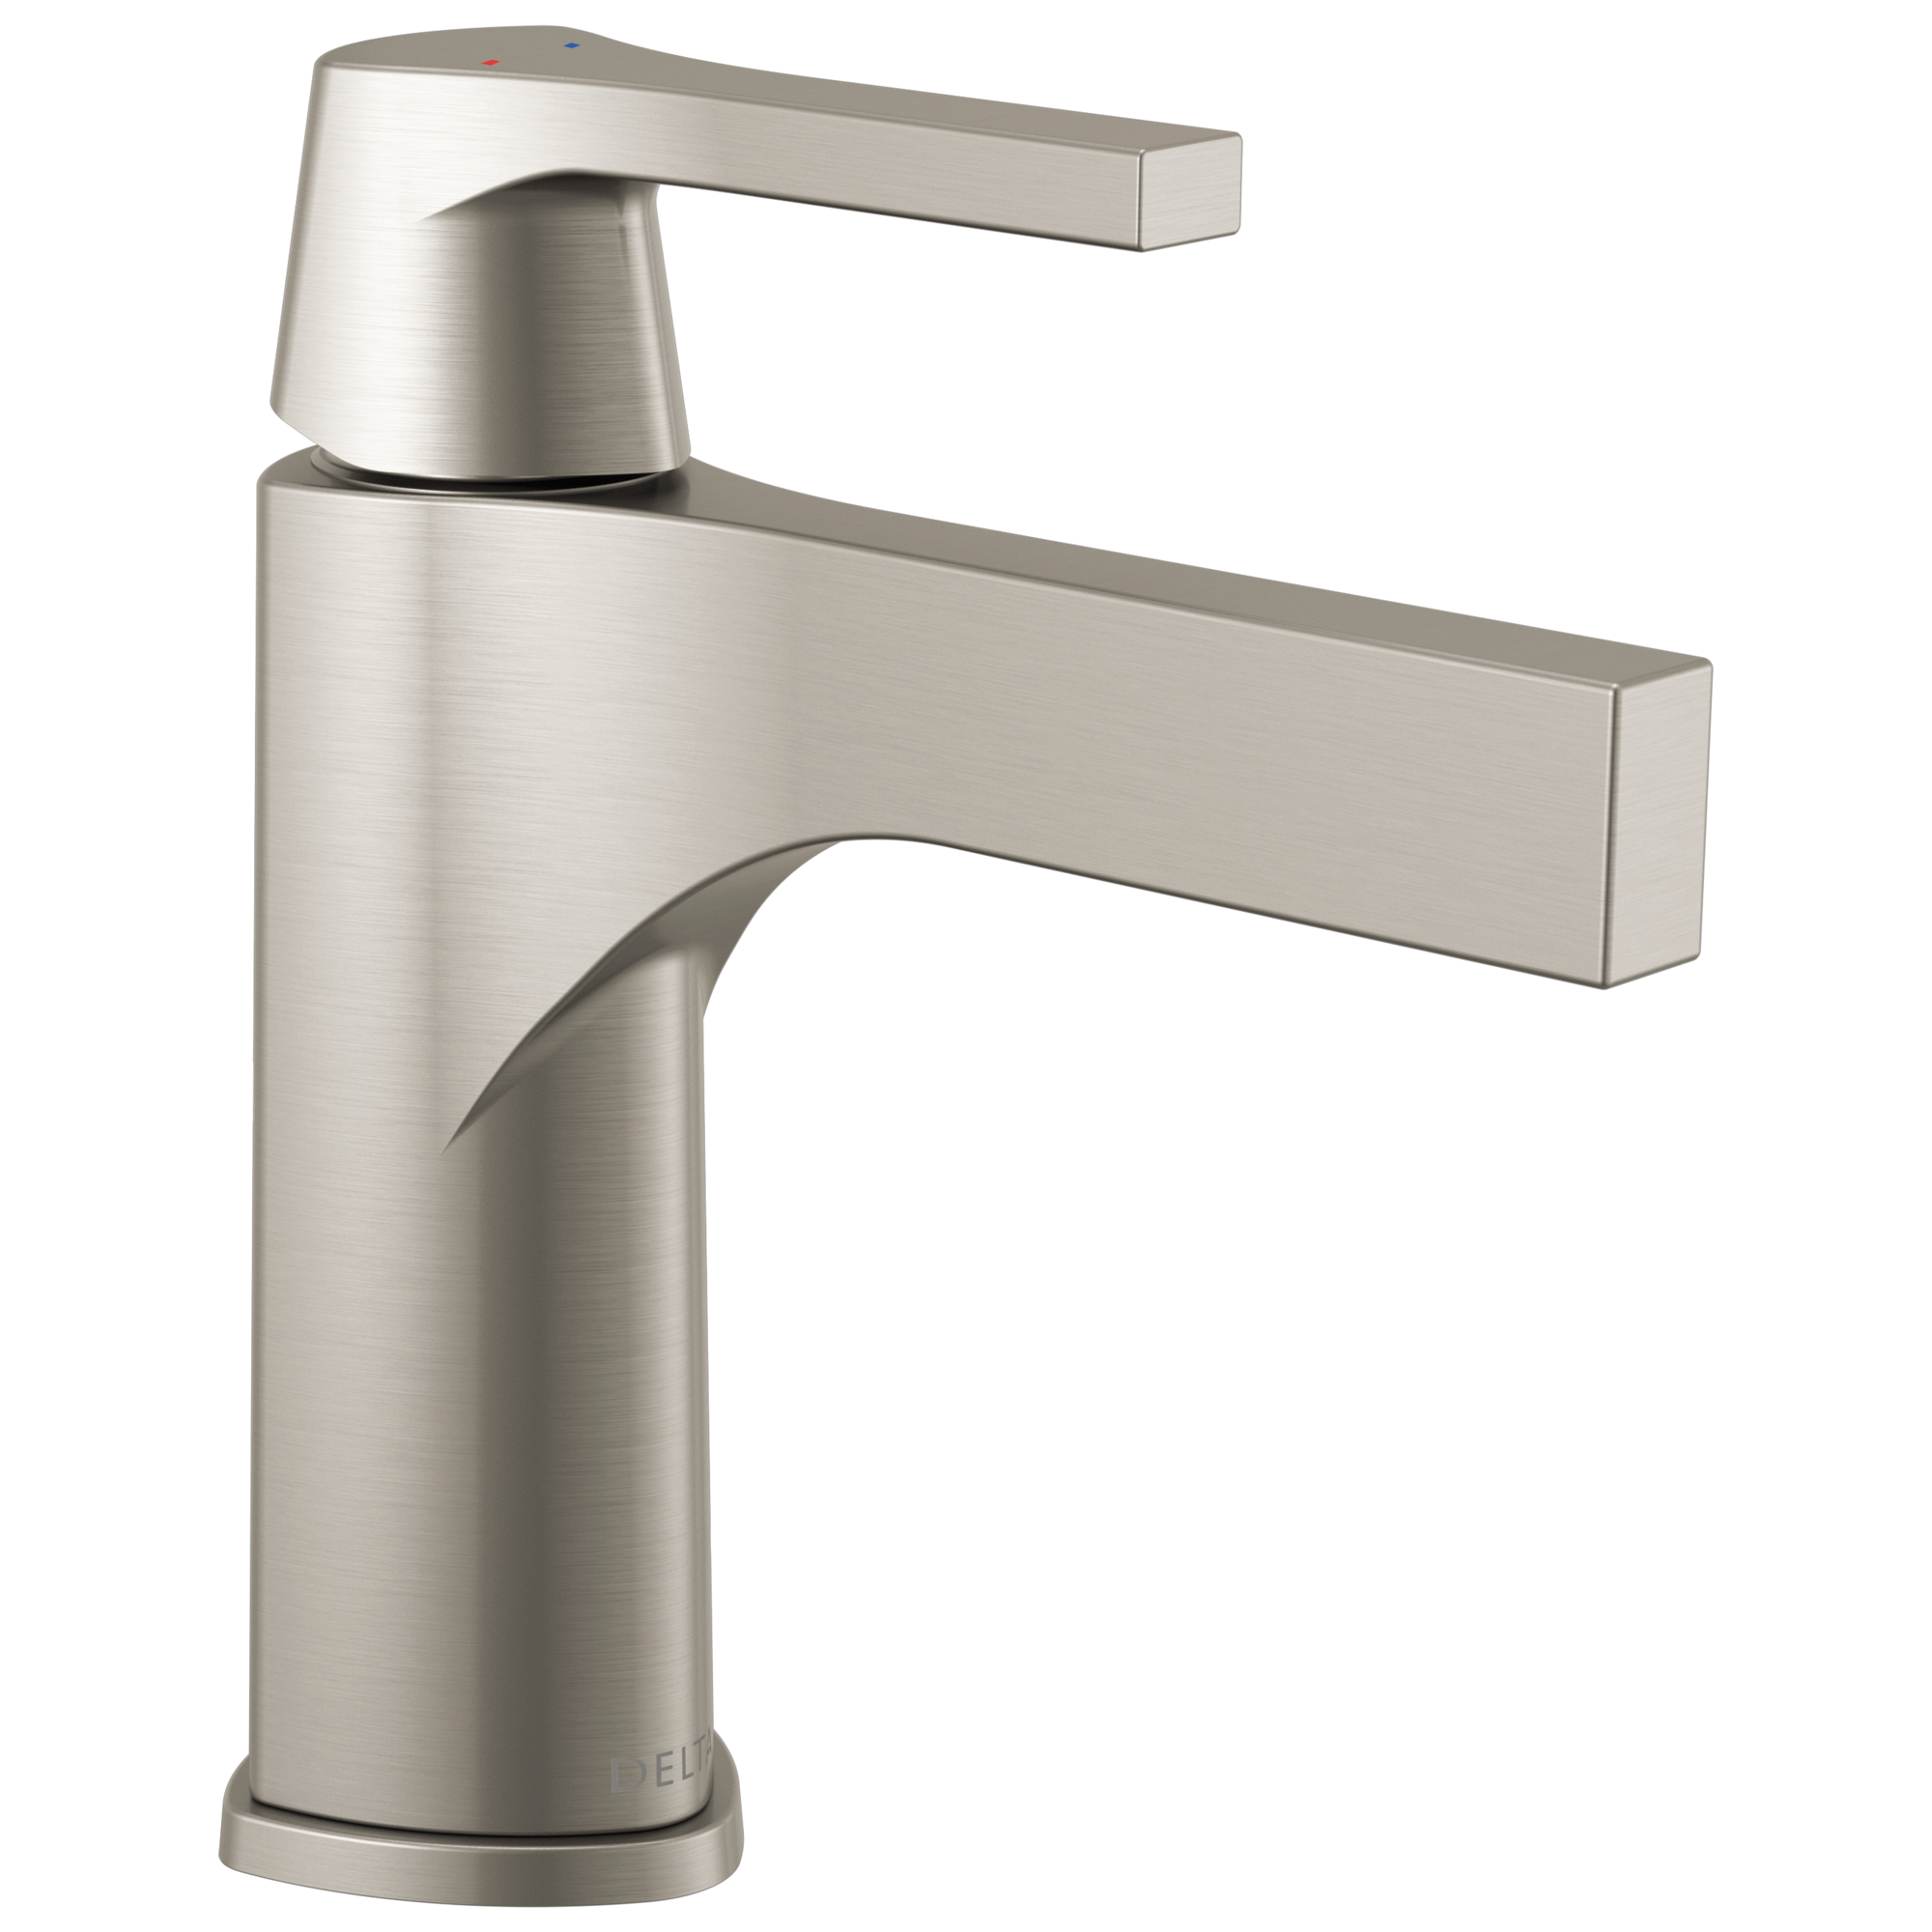 Delta Zura Single Handle Bathroom Faucet with Drain in Stainless